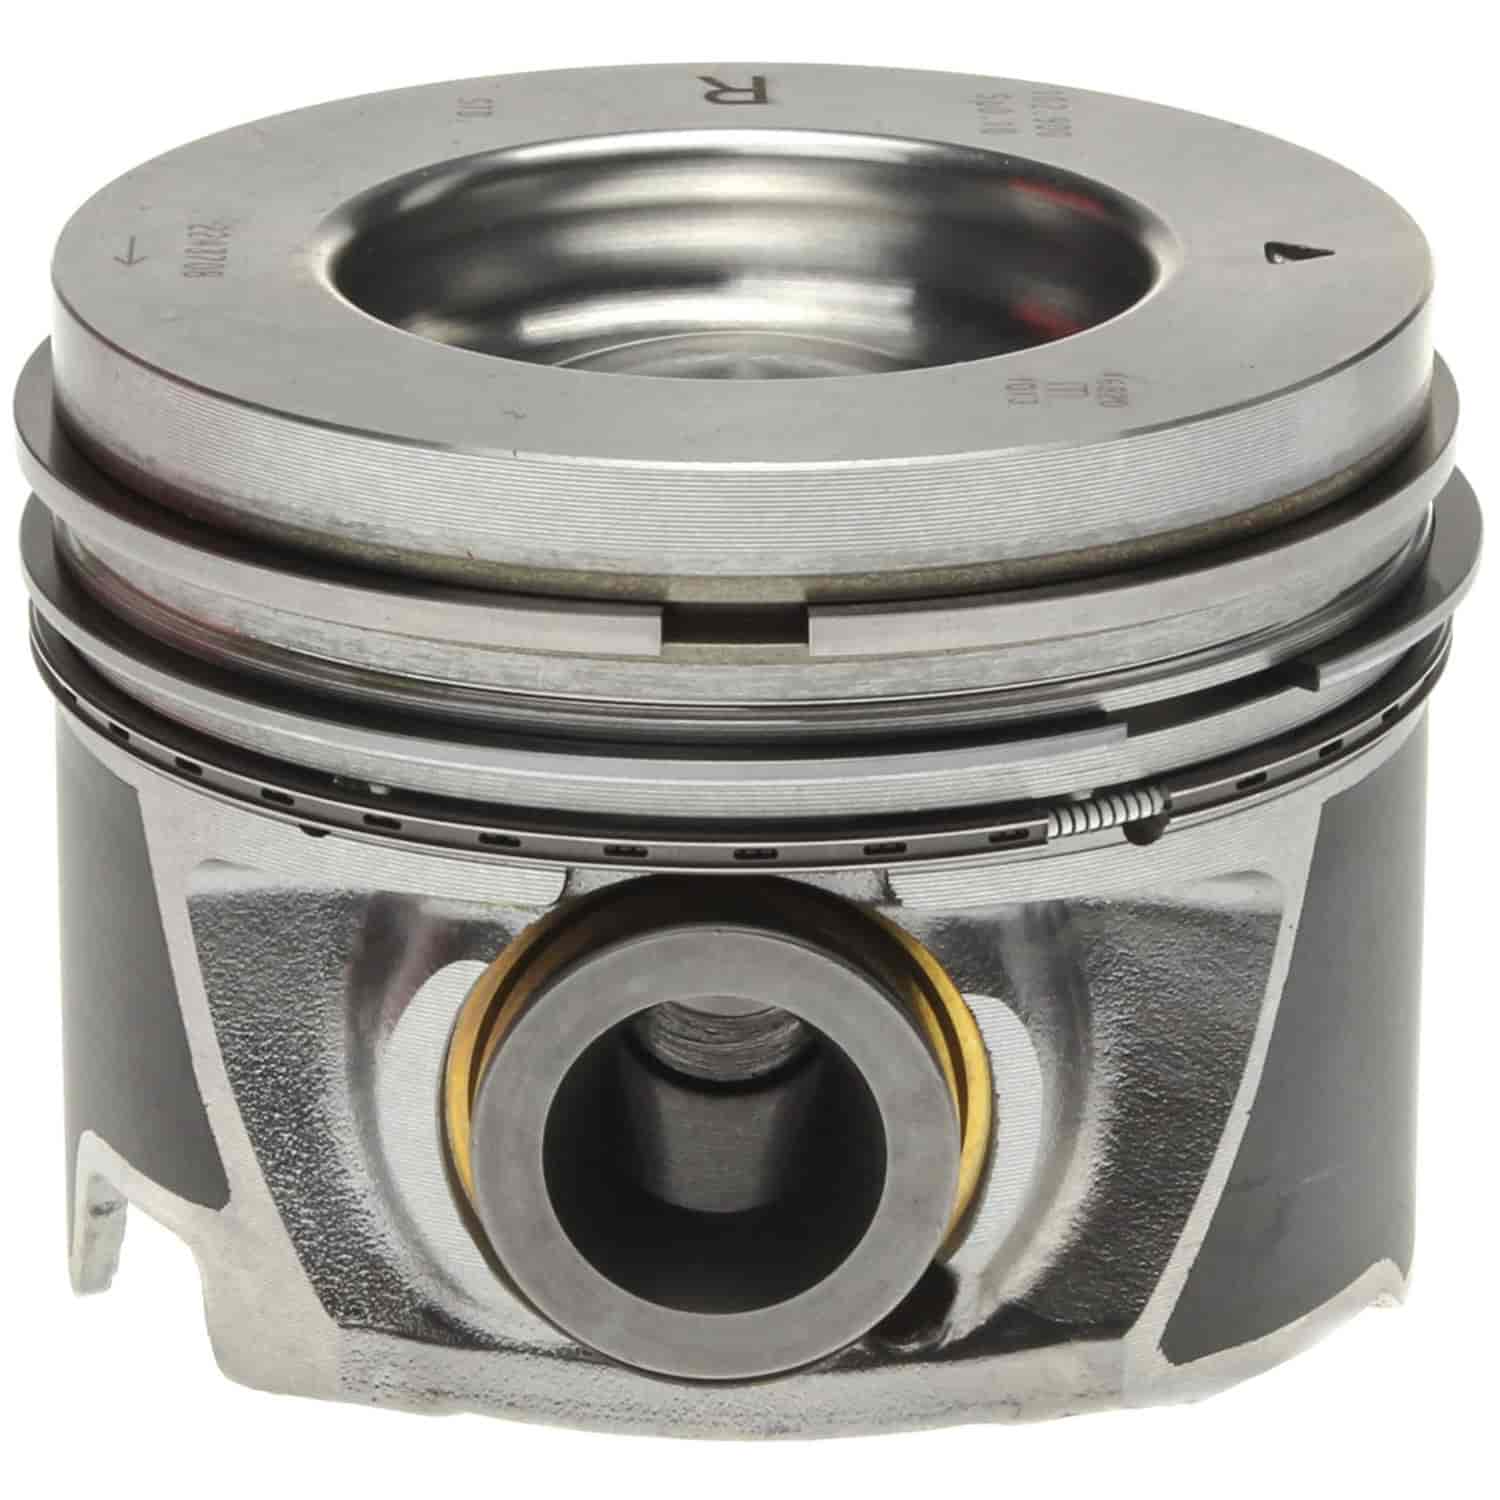 Piston and Rings Set 2006-2010 Chevy/GMC Duramax Diesel V8 6.6L Right Bank with 4.095" Bore (+.040")